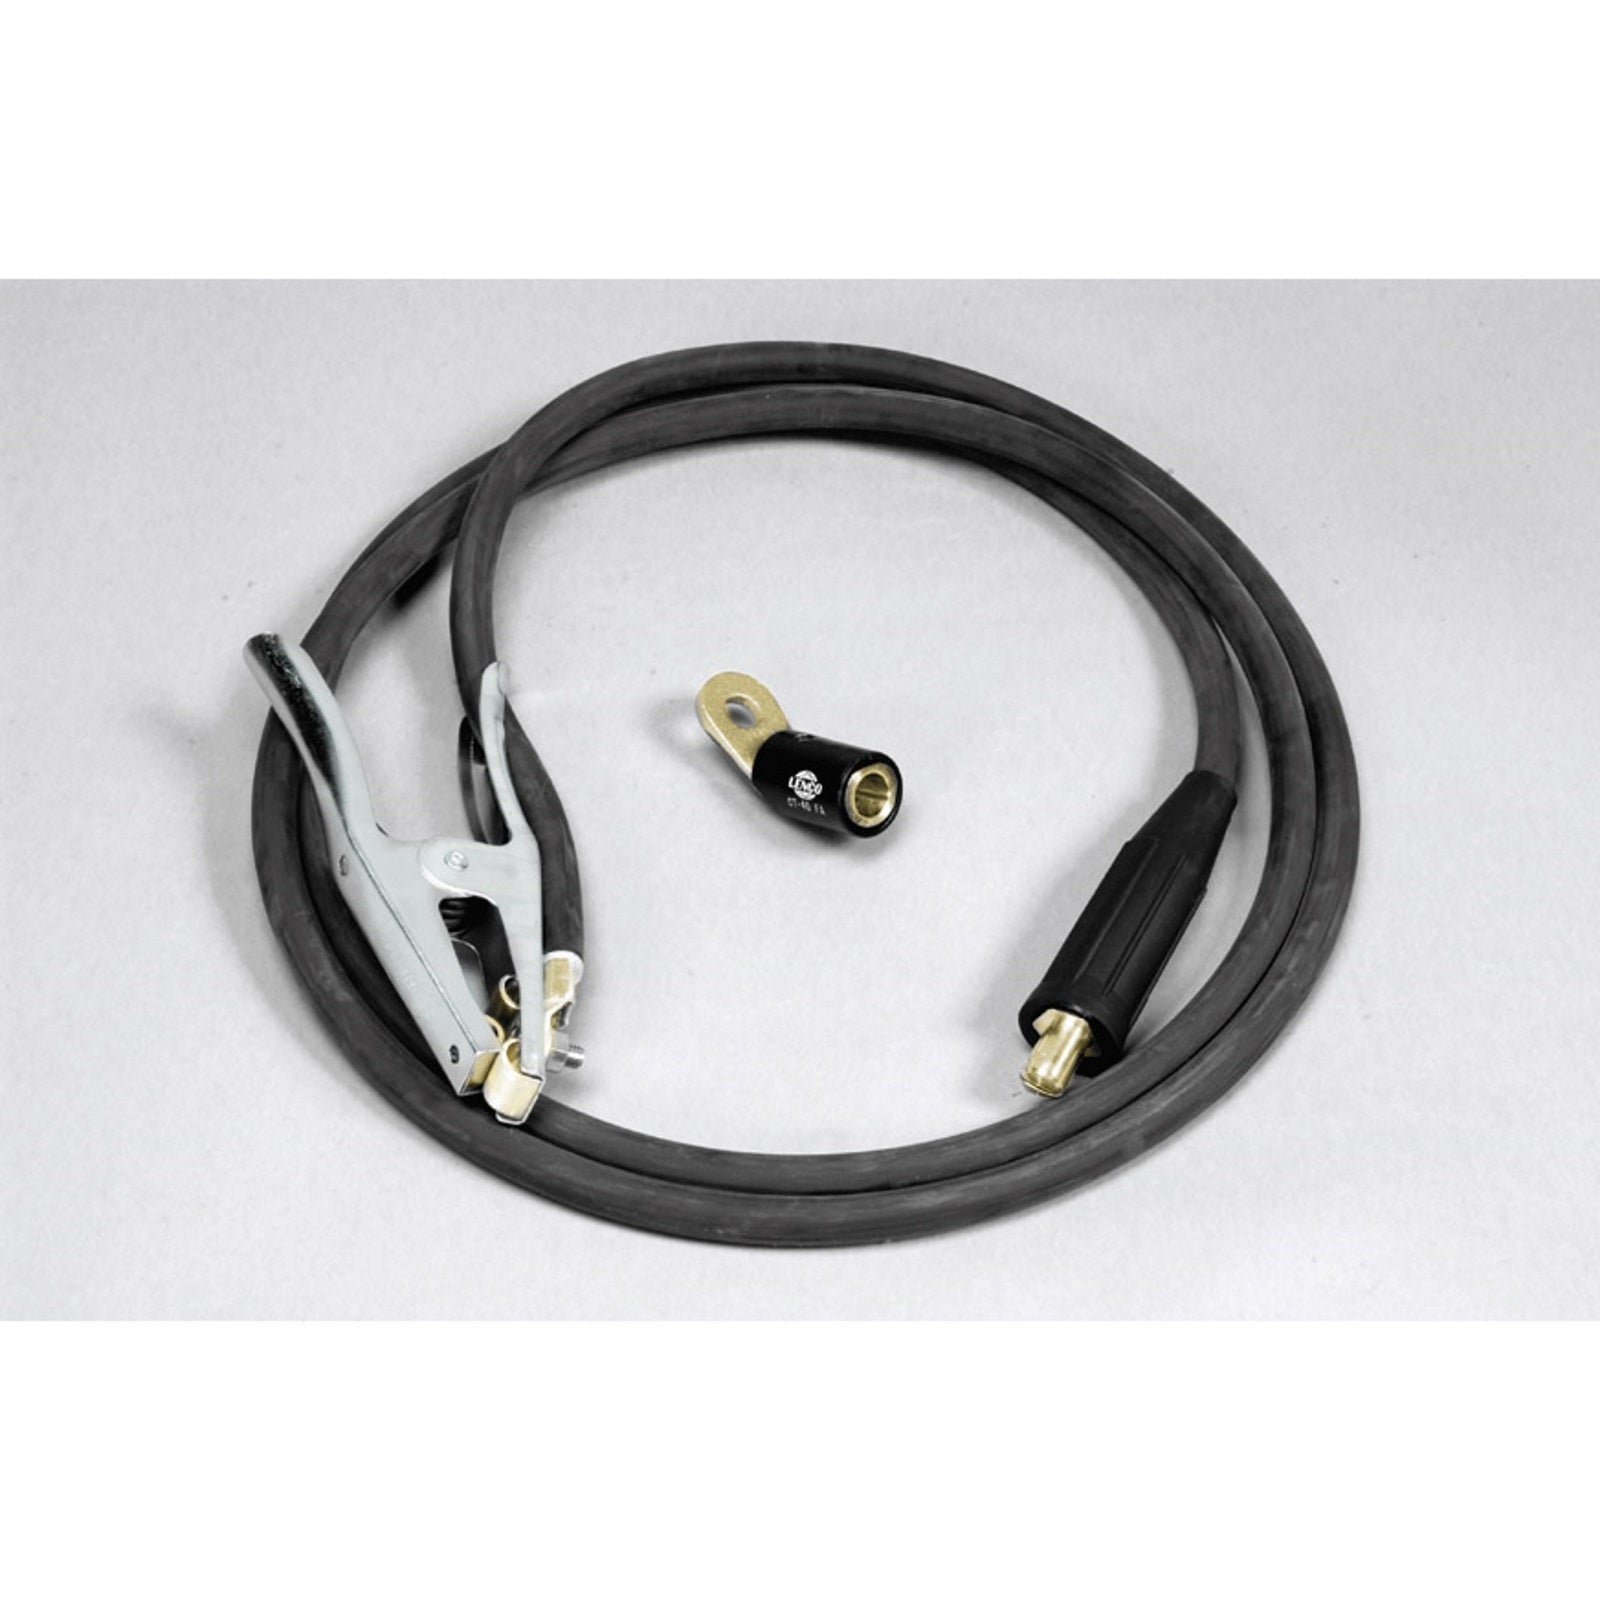 Miller 10' Weld Cable with Clamp (195458)